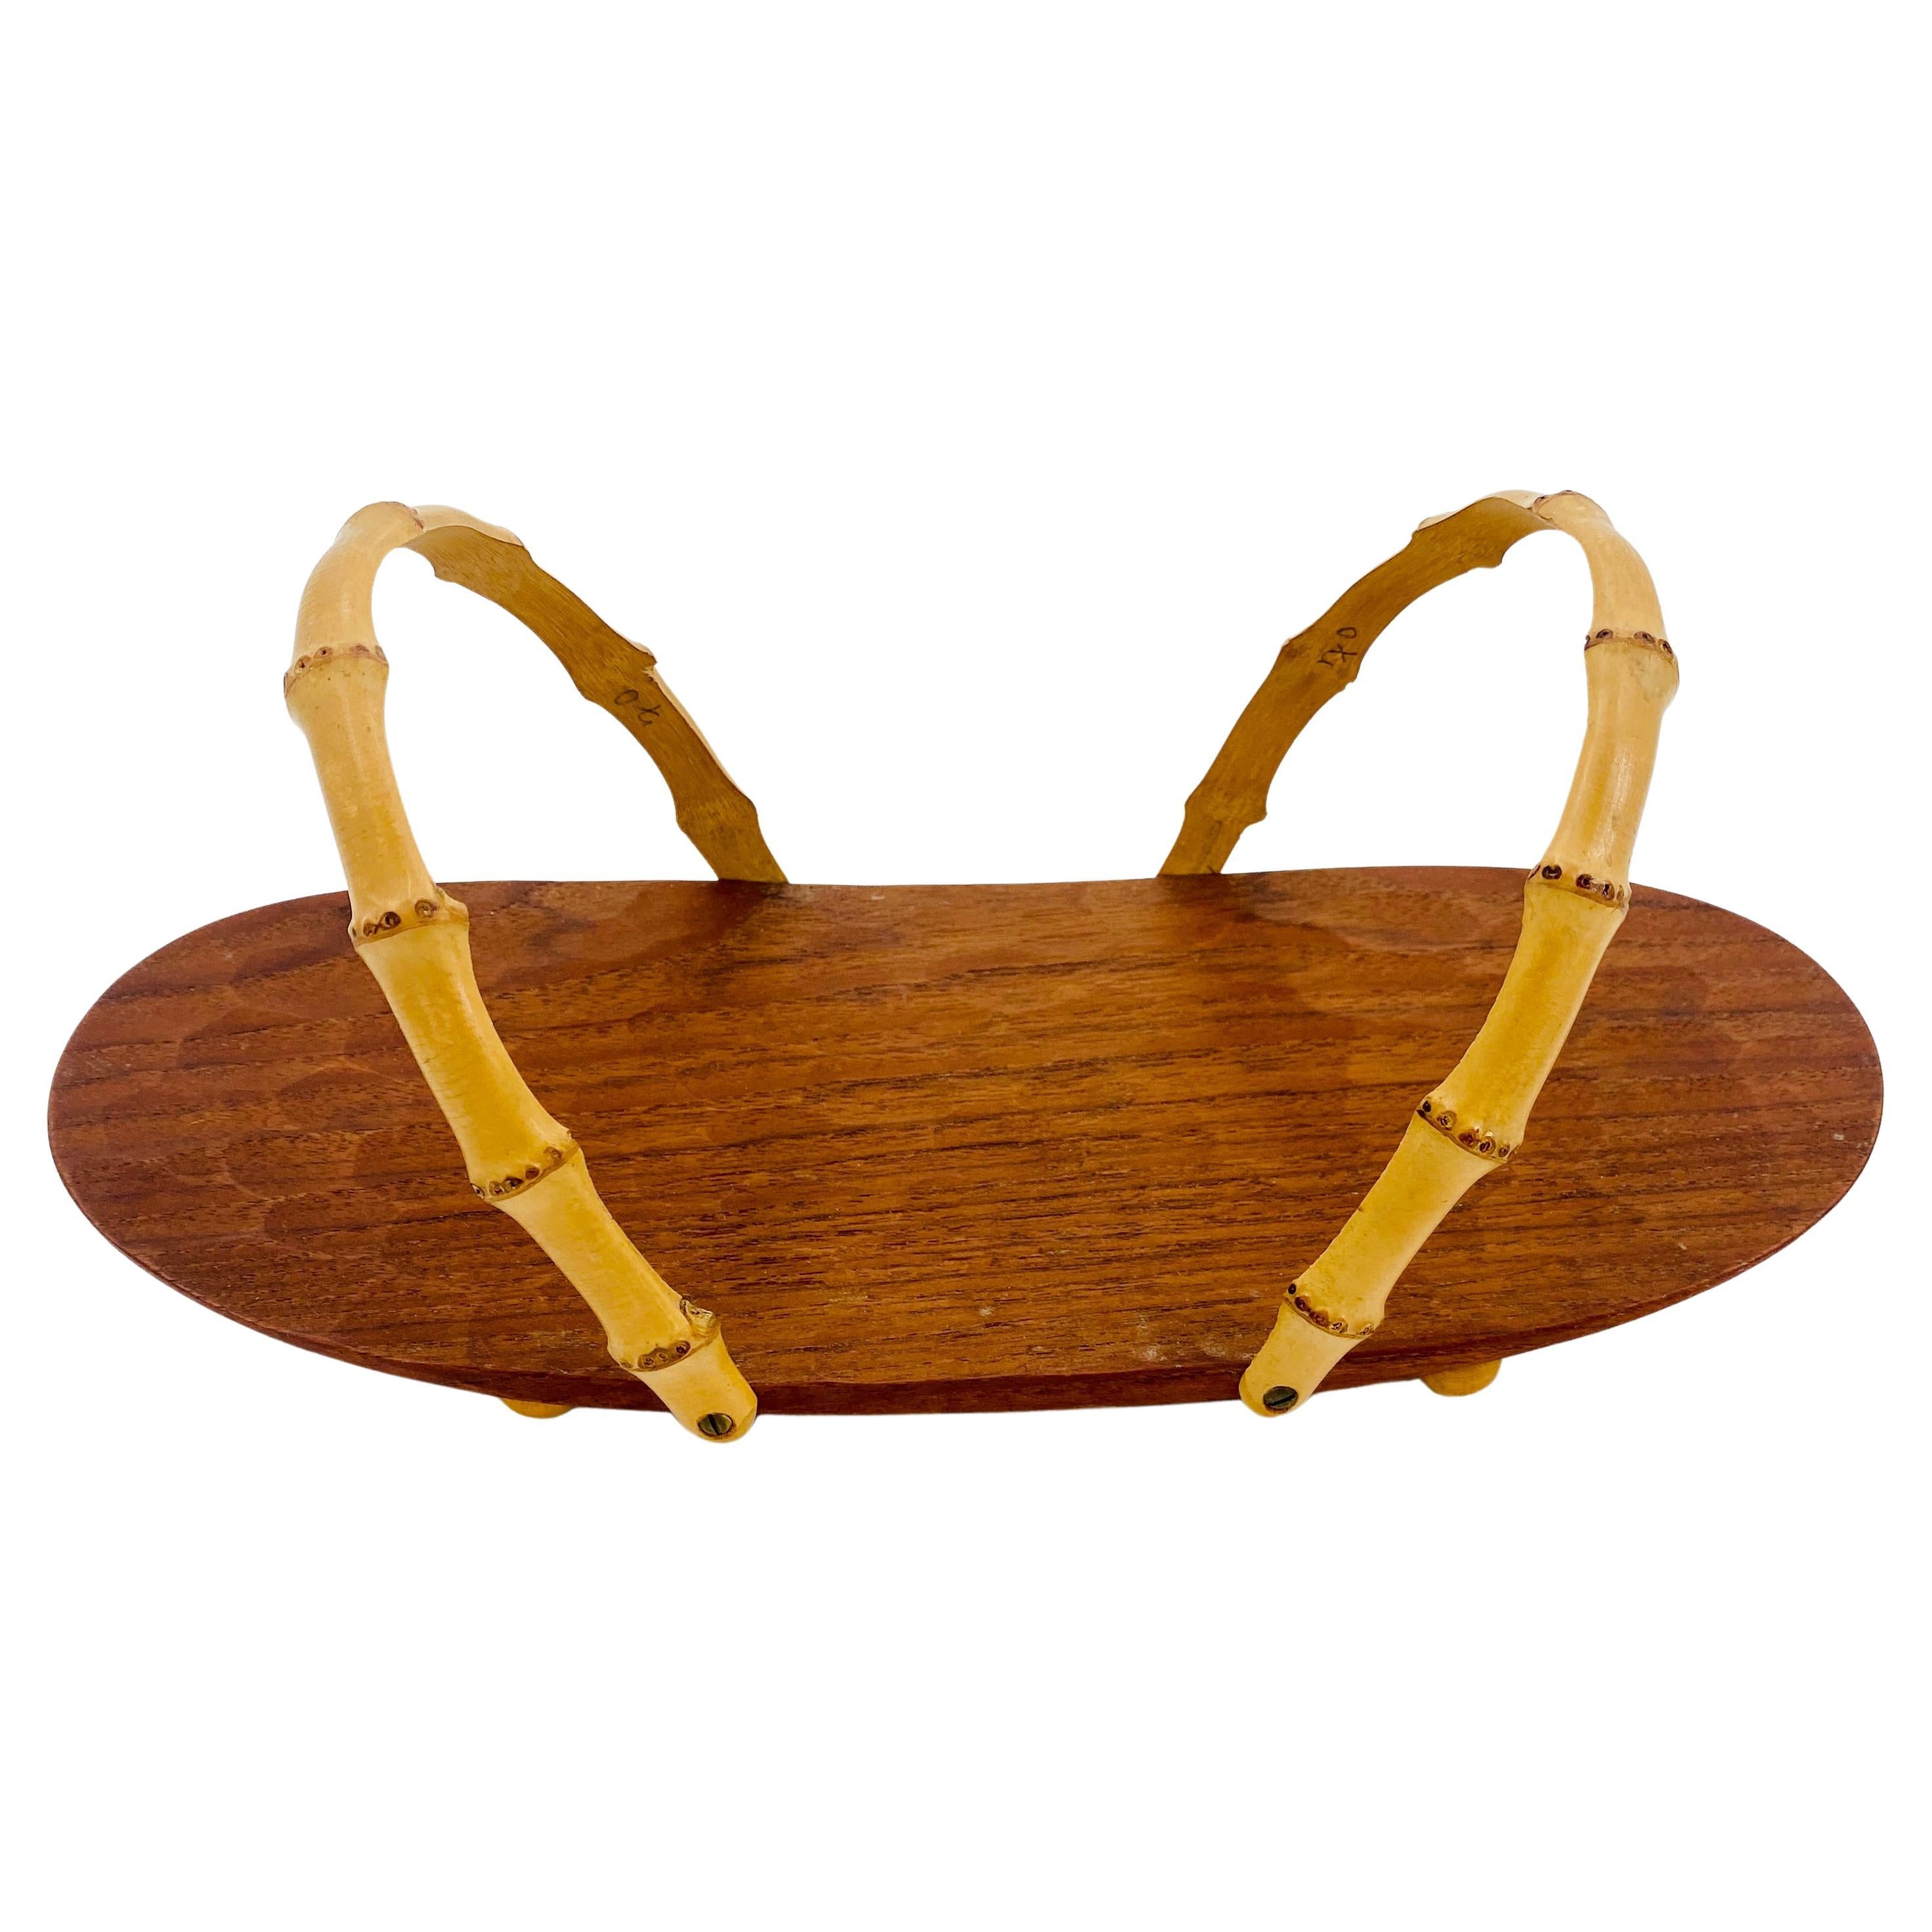 Scandinavian Mid-Century Modern Bread Basket or Napkin Tray in Teak With Bamboo Handles.
This rare teak serveware is made in teak and is marked underneath 